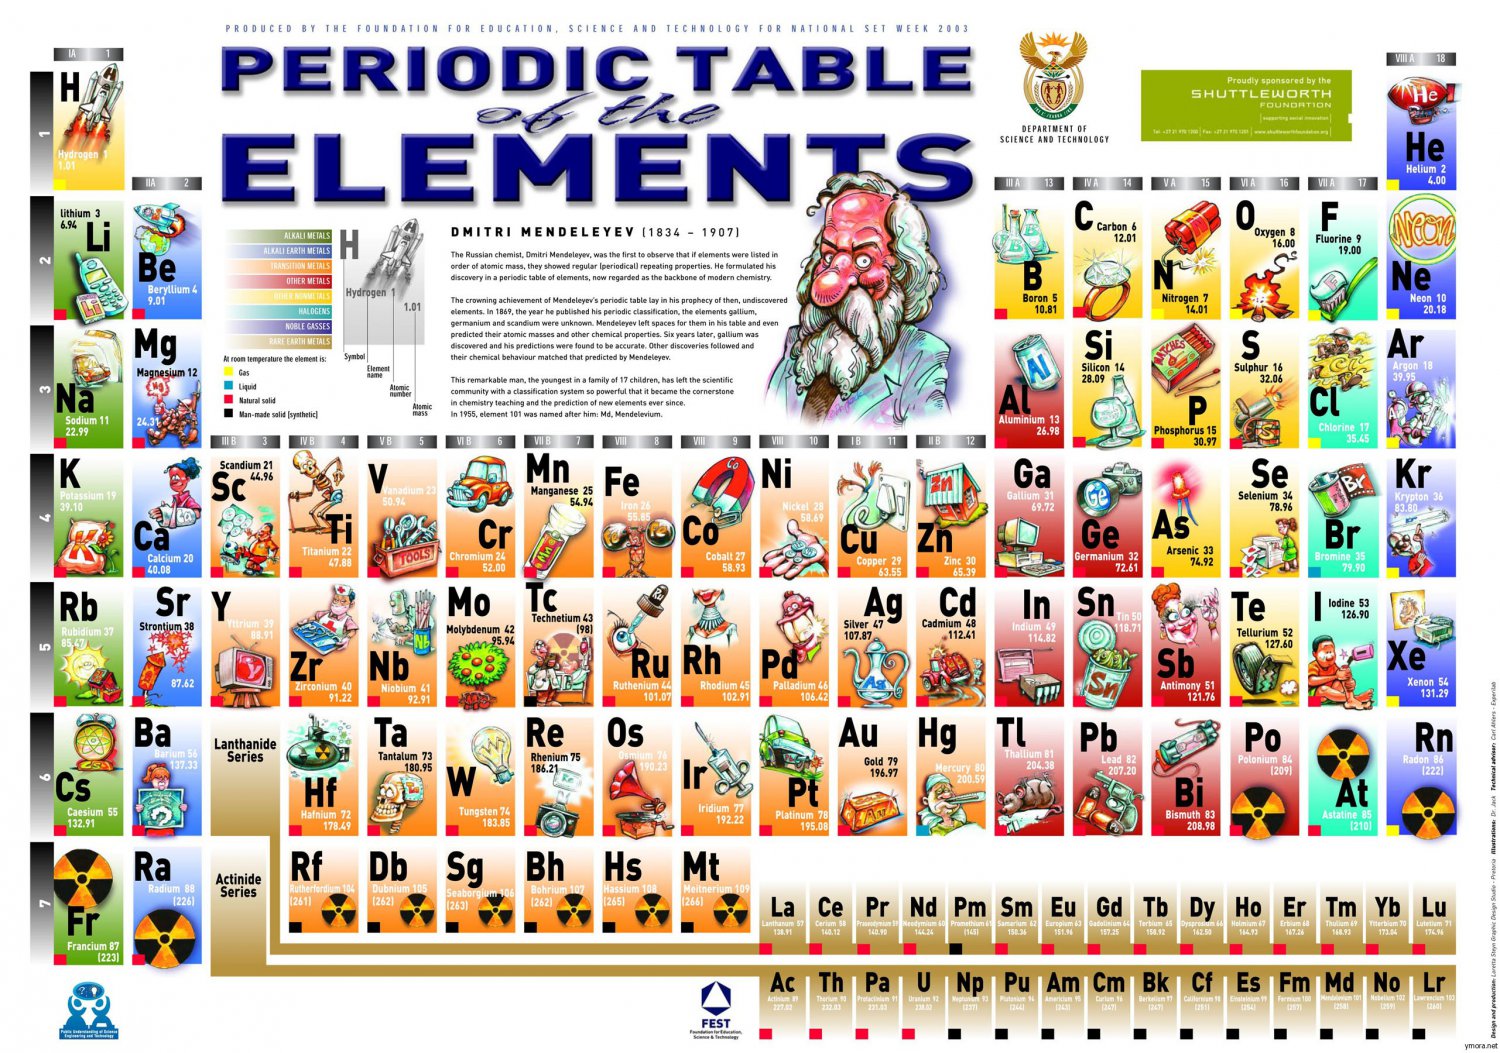 Periodic Table of Elements   18"x28" (45cm/70cm) Poster